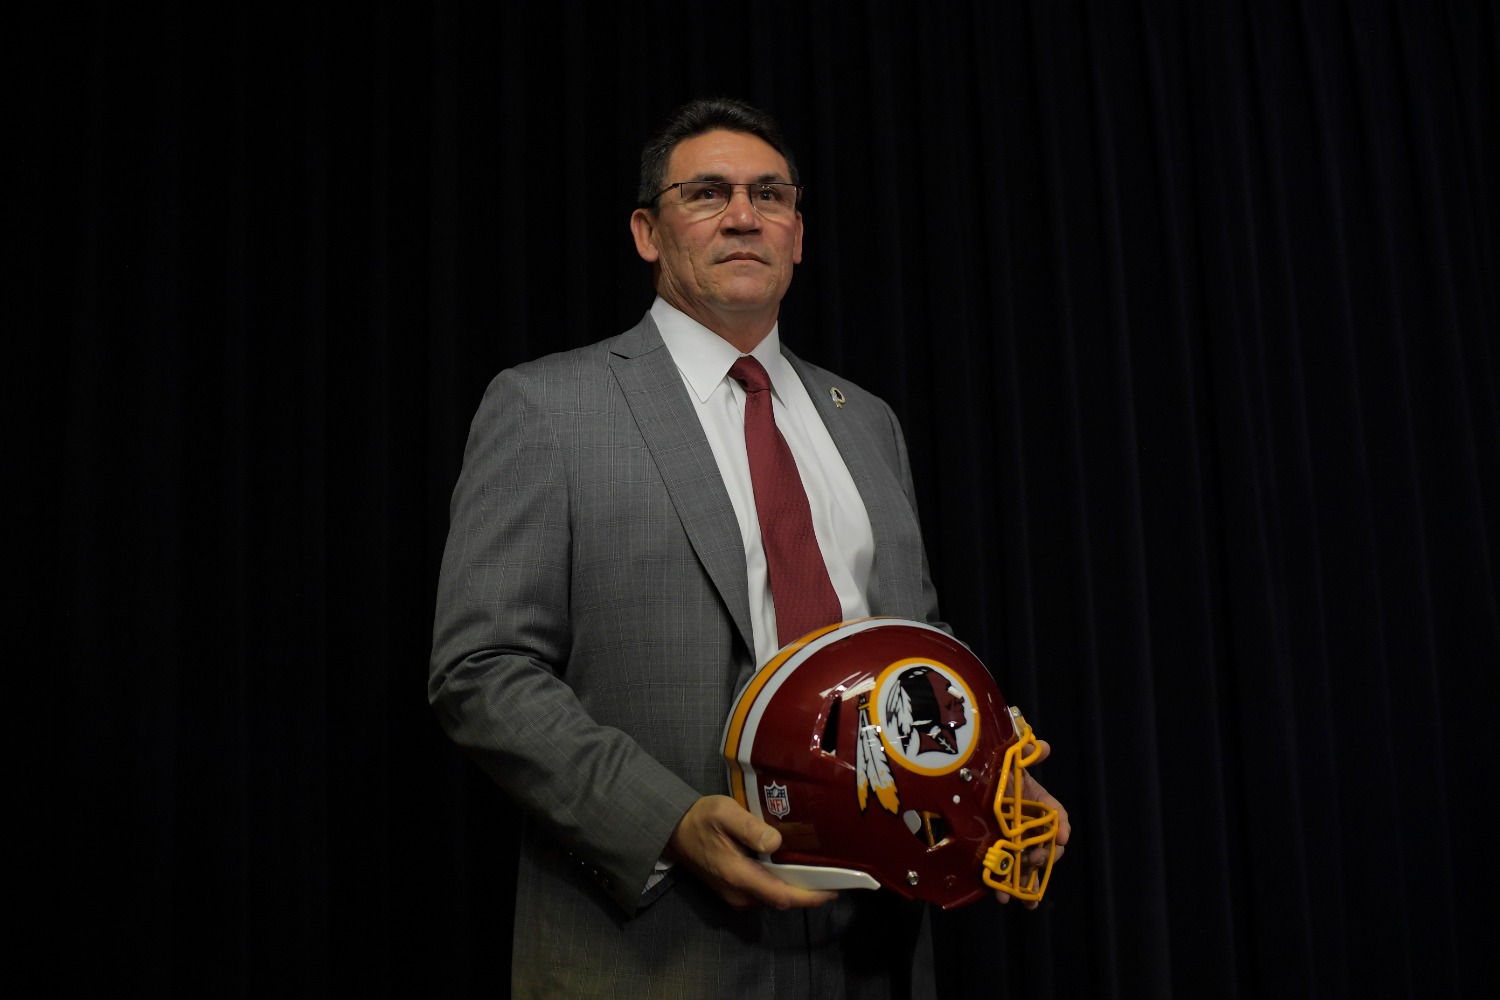 Washington Redskins head coach Ron Rivera is the perfect leader during this time of crisis.